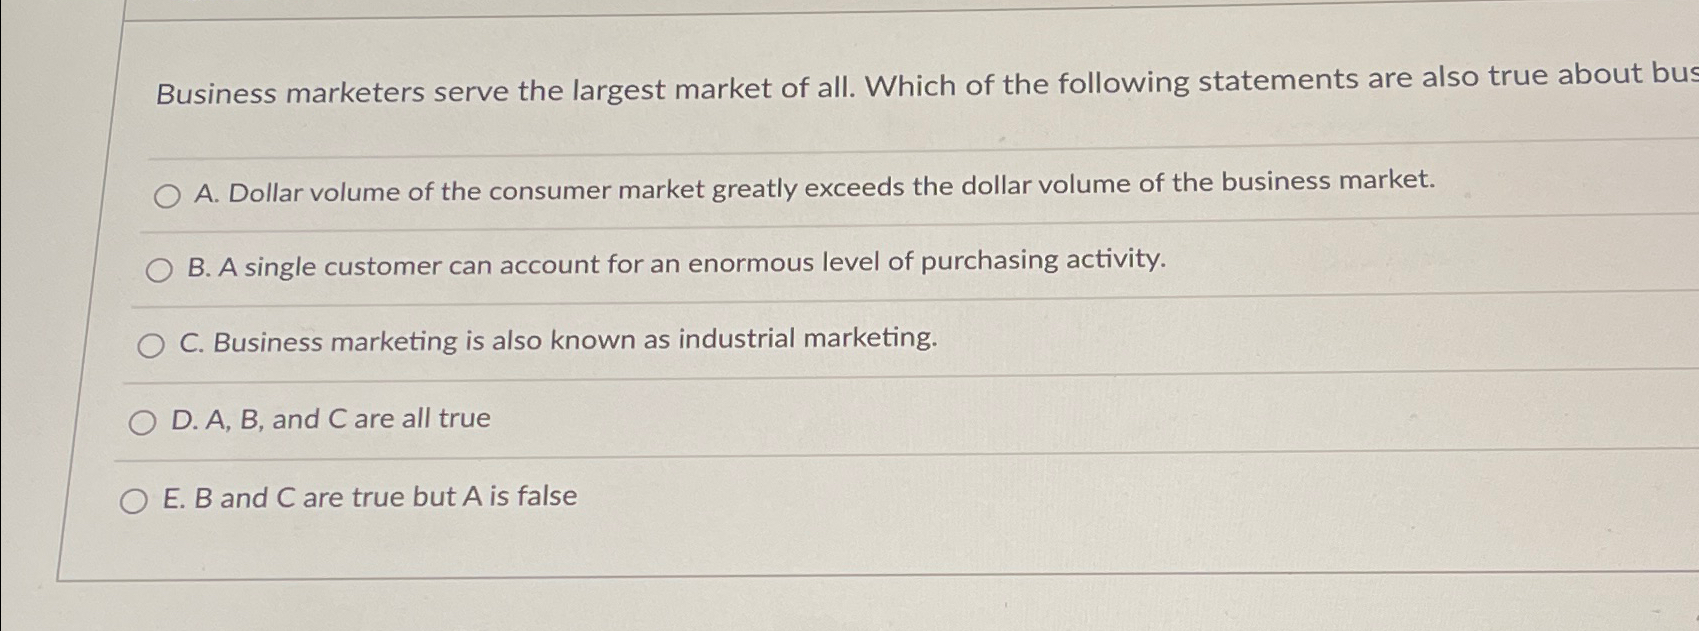 Industrial Marketing is Also Known As Which of the Following?  